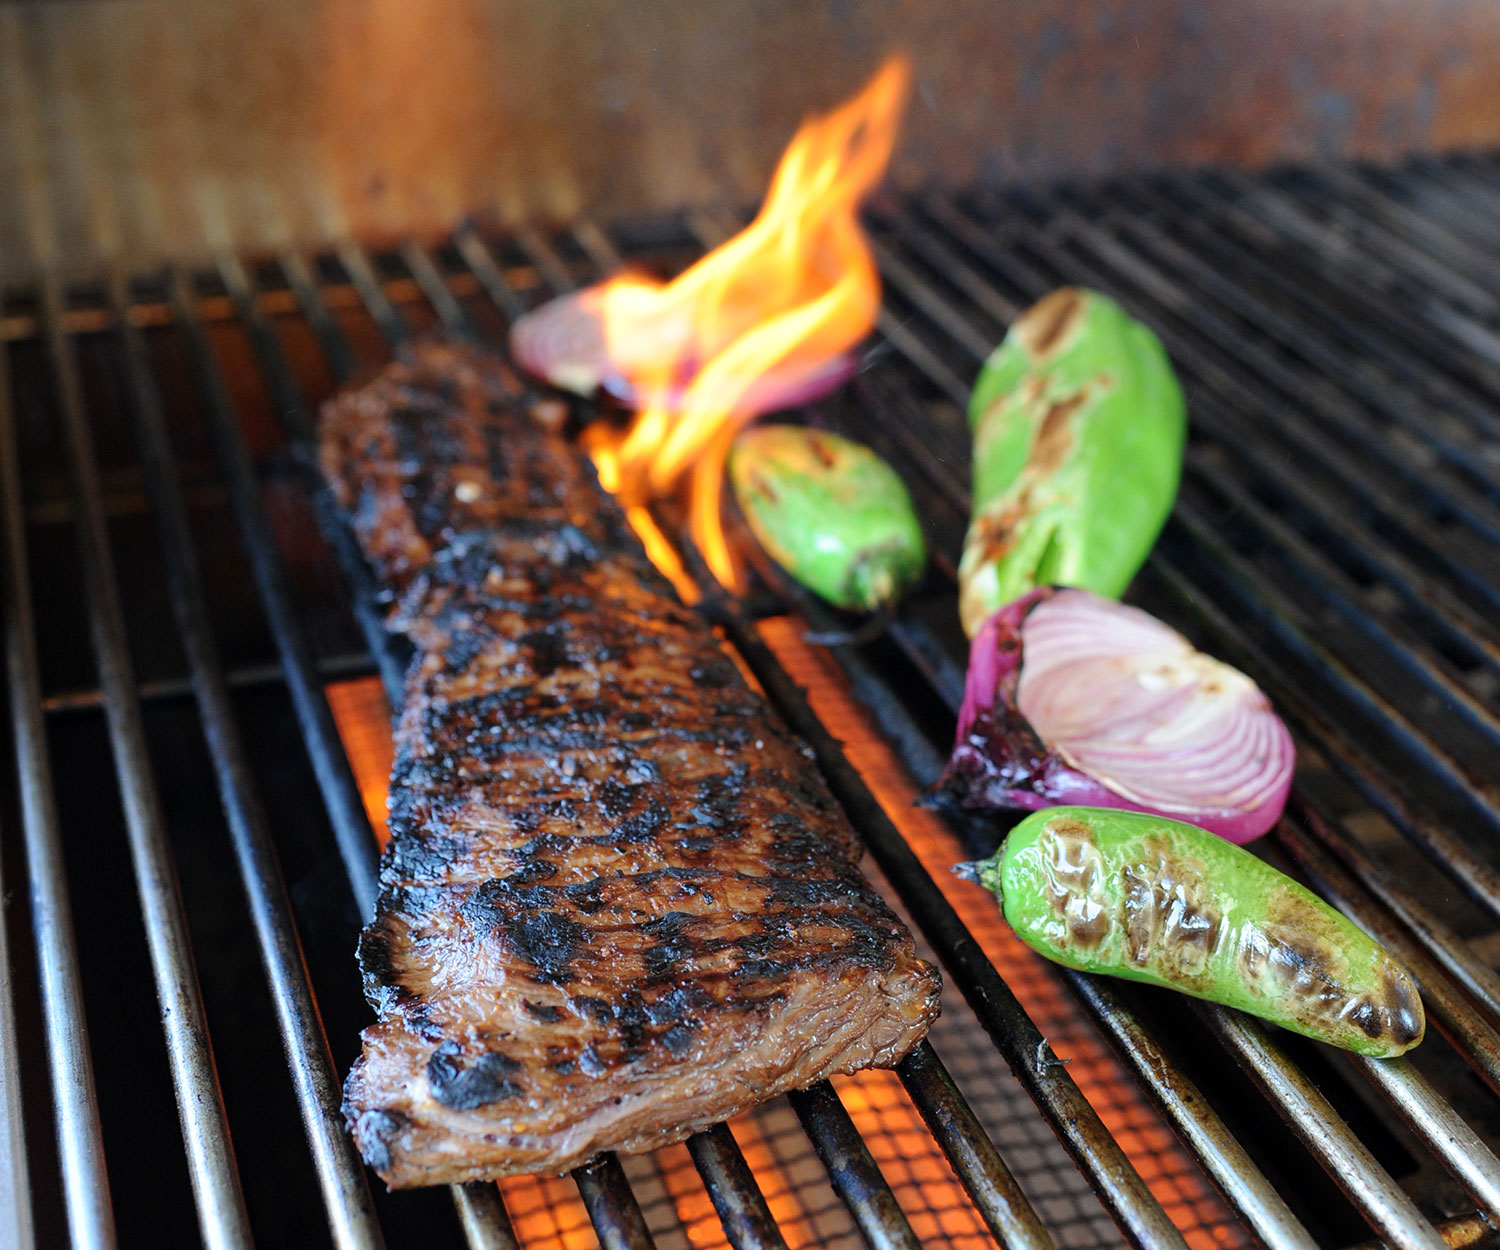 flame kissing a skirt steak on the grill